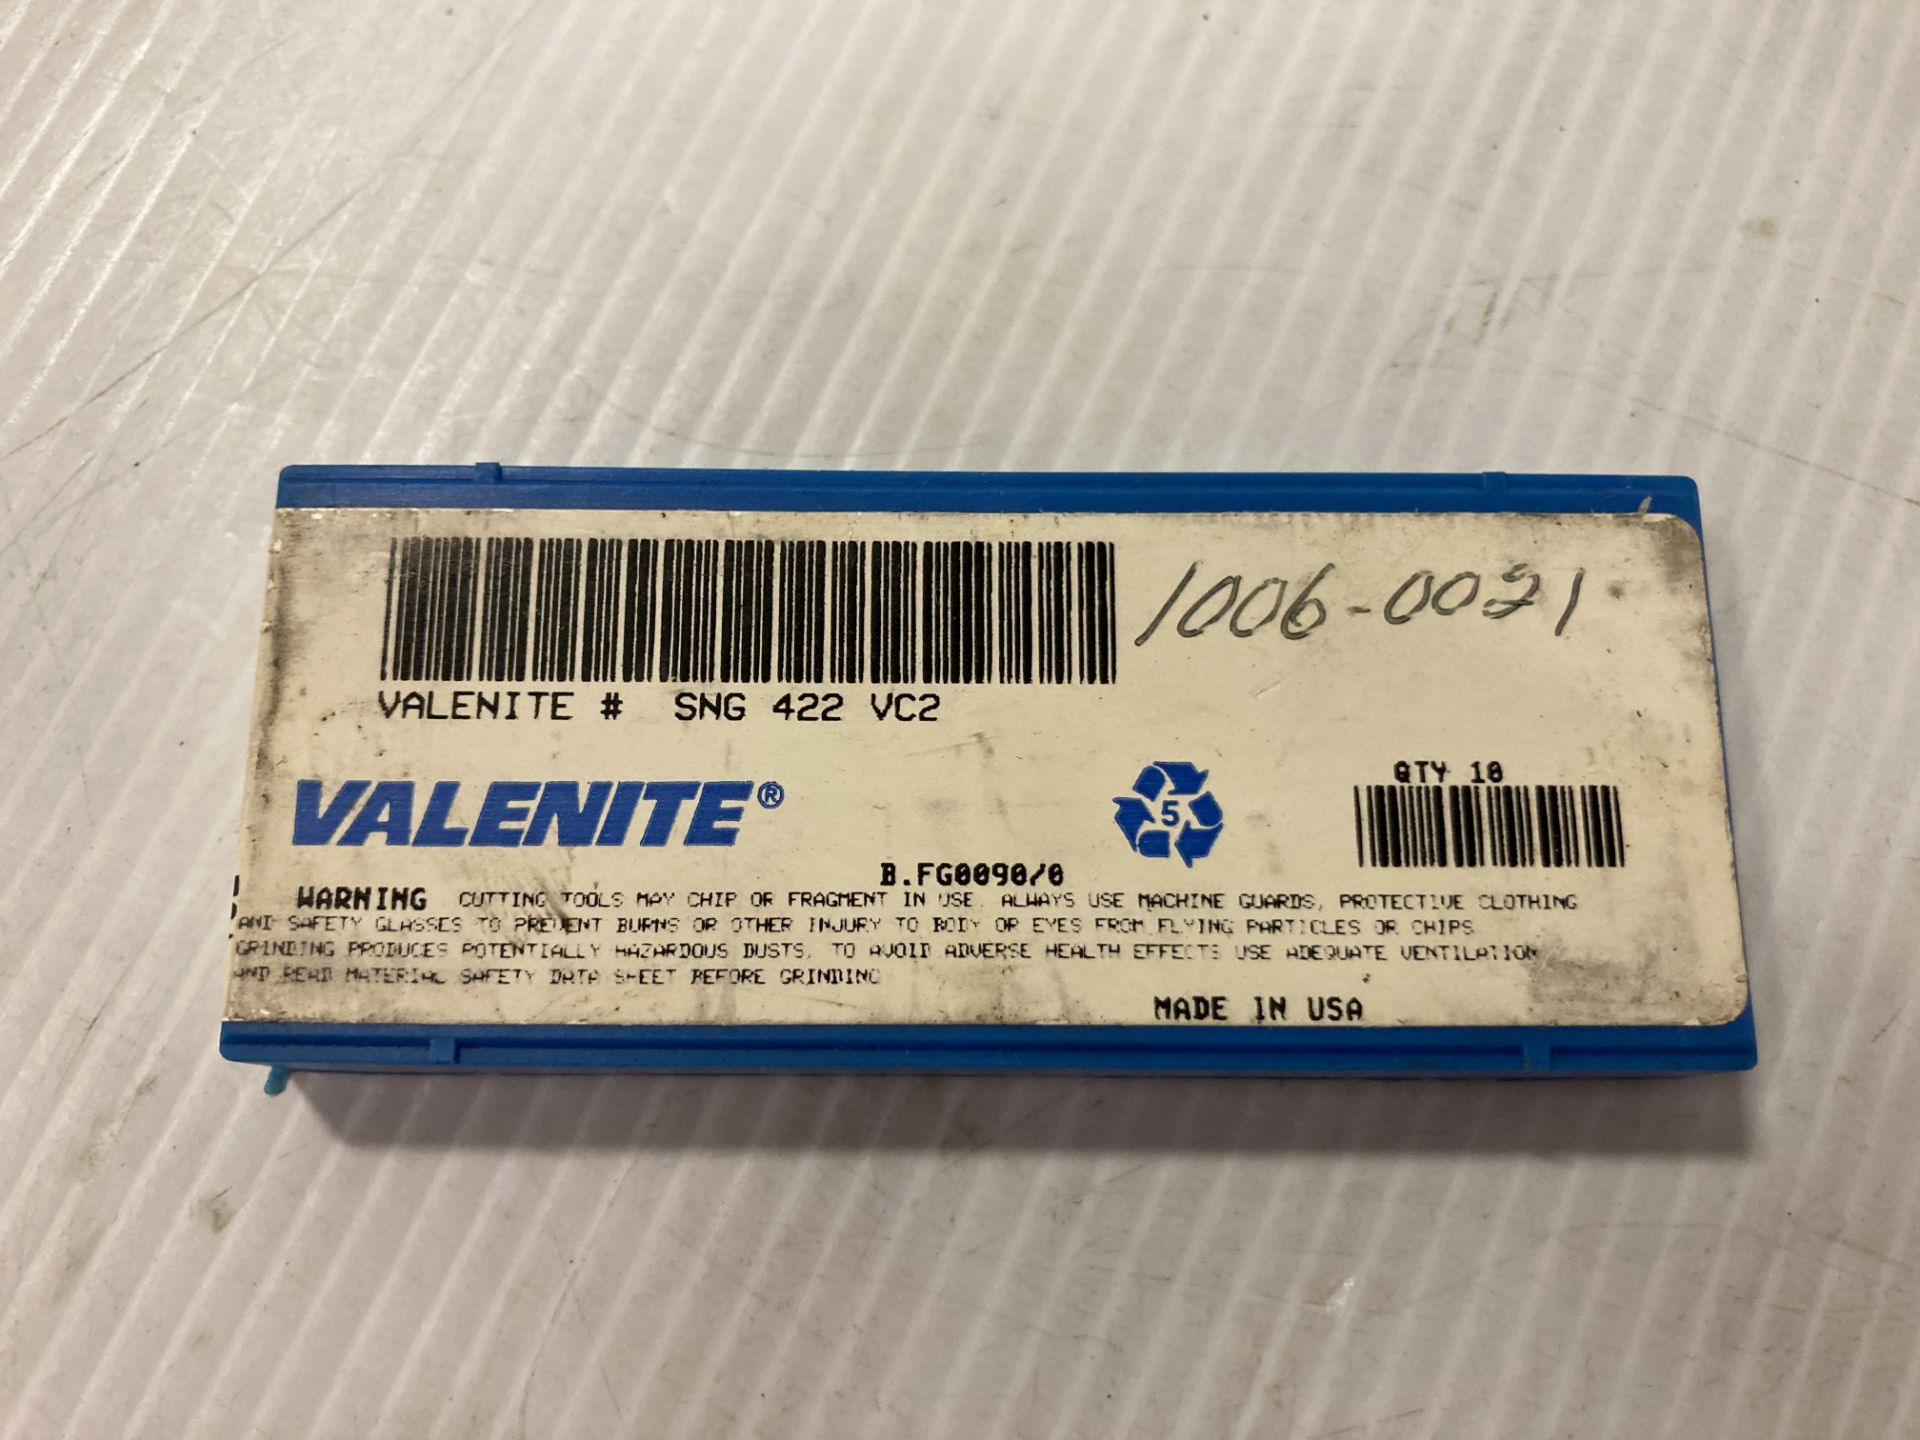 Lot of (90) New? Valenite Carbide Inserts, P/N: SNG 422 VC2 - Image 3 of 3